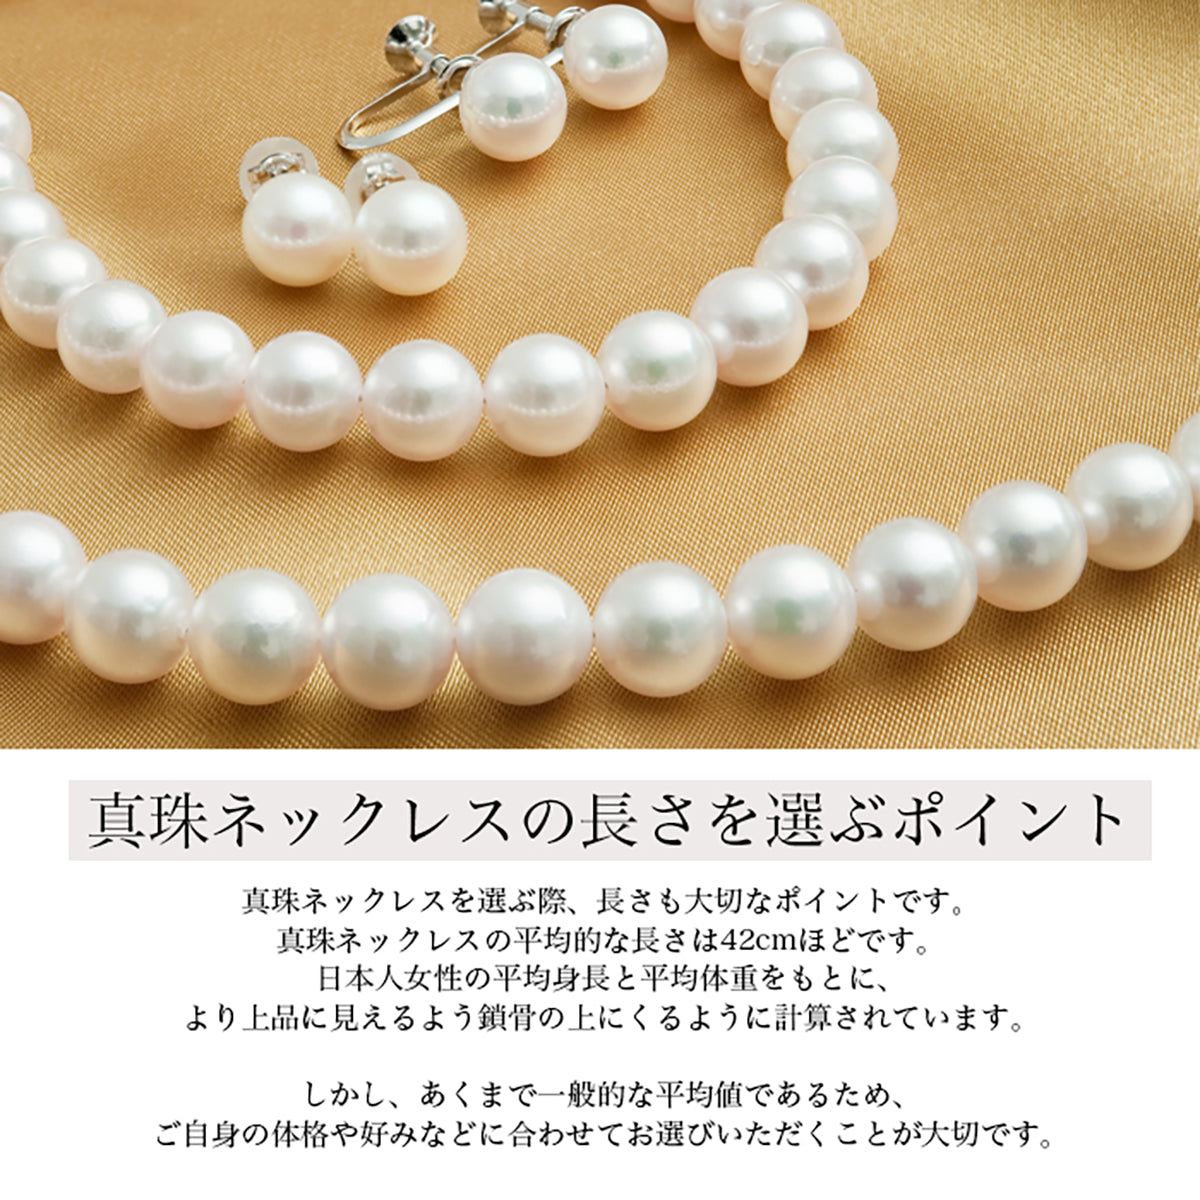 [Specially selected material: Florence pearl] Akoya pearl formal necklace 2-piece set earrings/pierced earrings [7.5-8.0mm] White Roll thickness 0.5mm or more Certificate of authenticity Storage case included